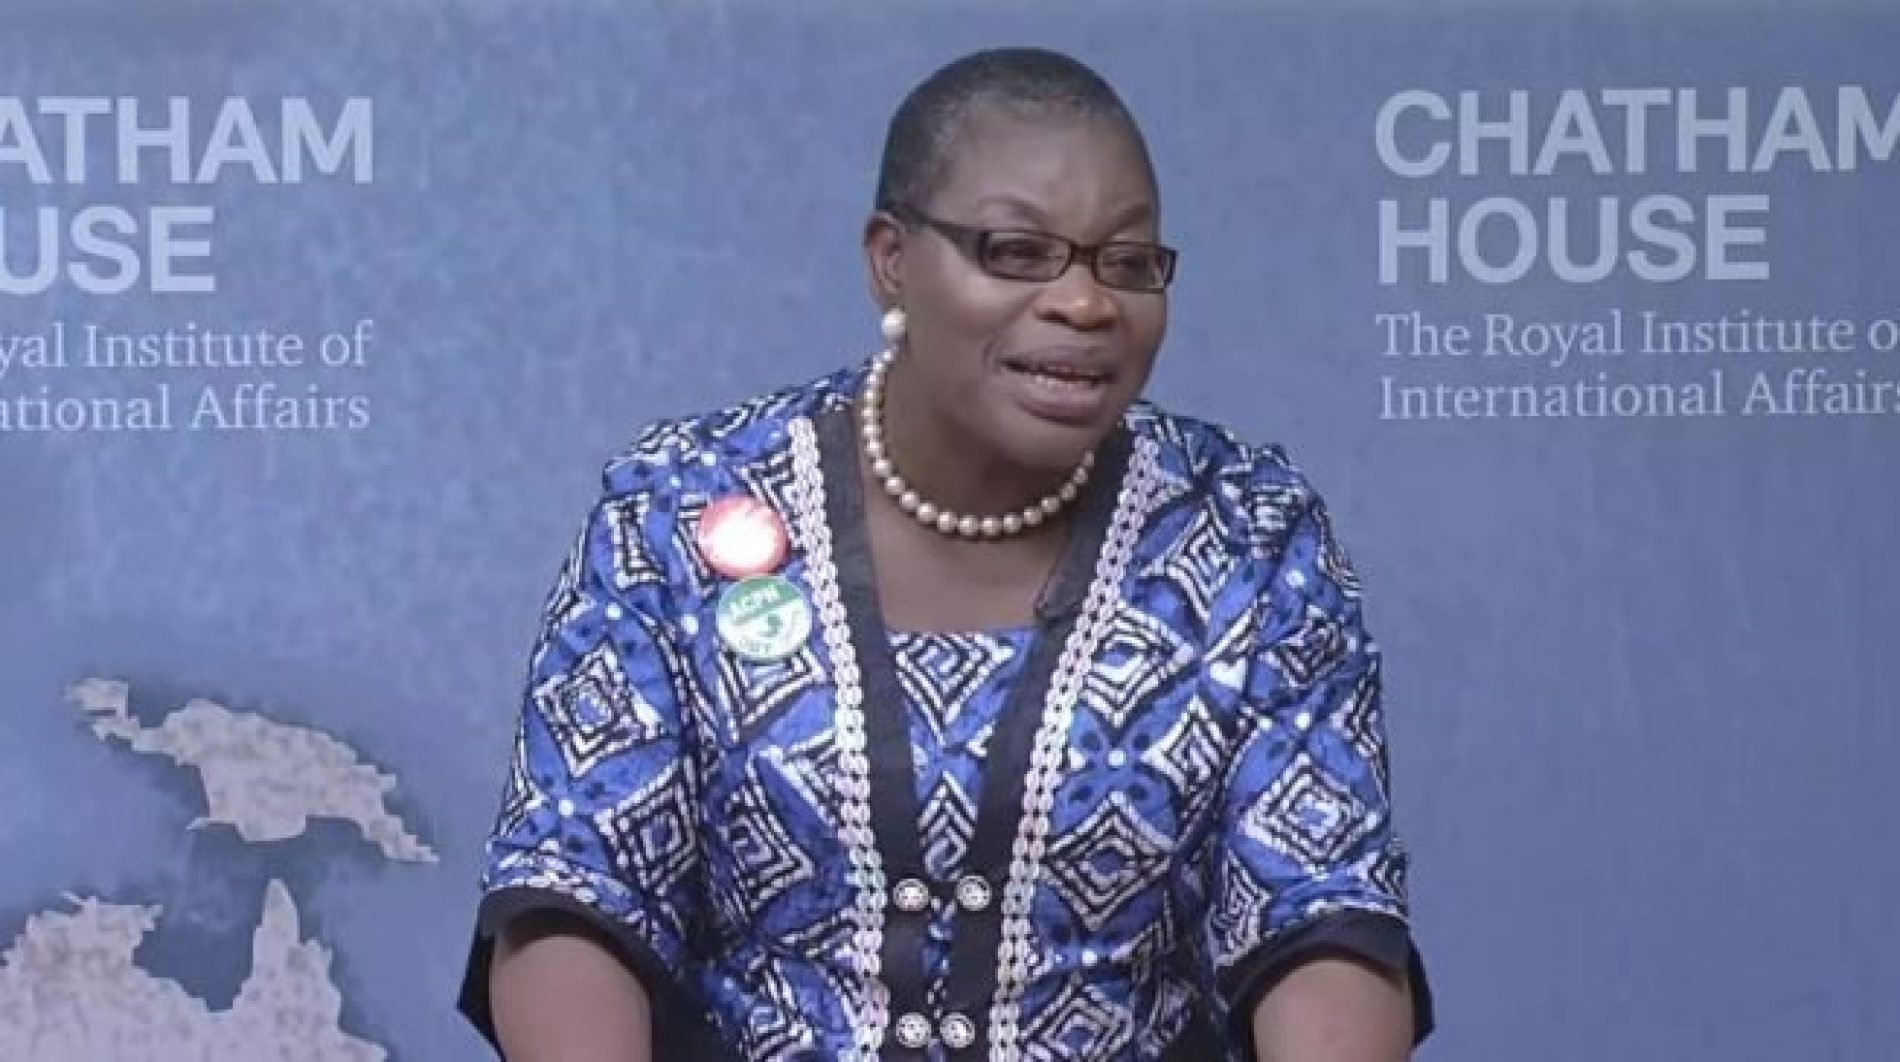 Presidential candidate, Oby Ezekwesili says her government, if she’s president, will respect LGBT rights